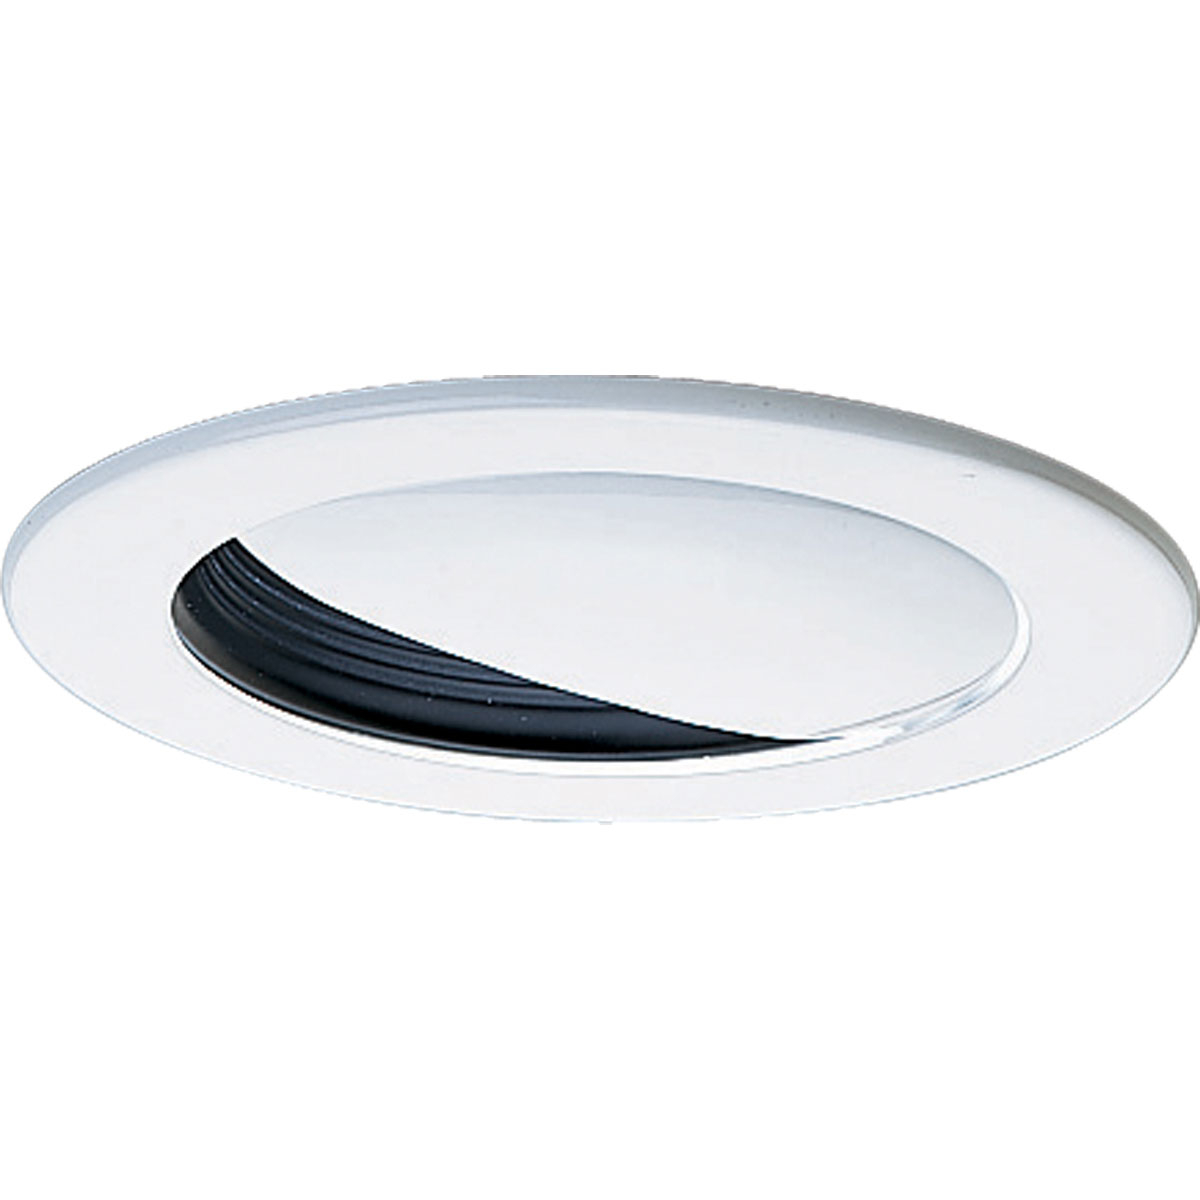 4 in Wall Washer Trim in a Black finish with bright white powdered painted metal flange. 360 positioning, tilt 20. 5 in outside diameter.